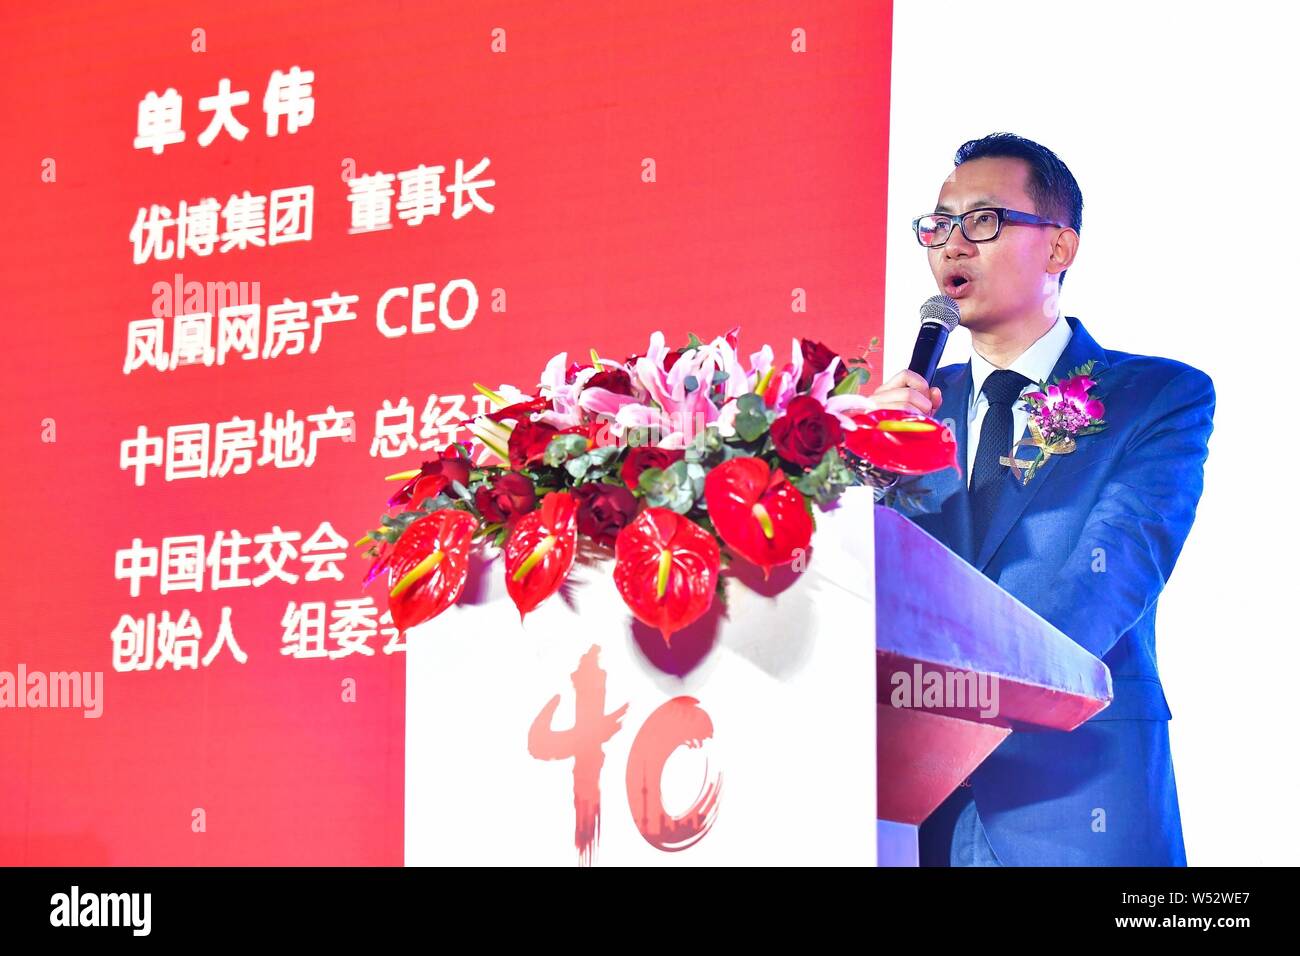 Shan Dawei, chairman of UB Group and genaral manager of creb.com, attends the 20th China International Real Estate & Architectural Technology Fair in Stock Photo